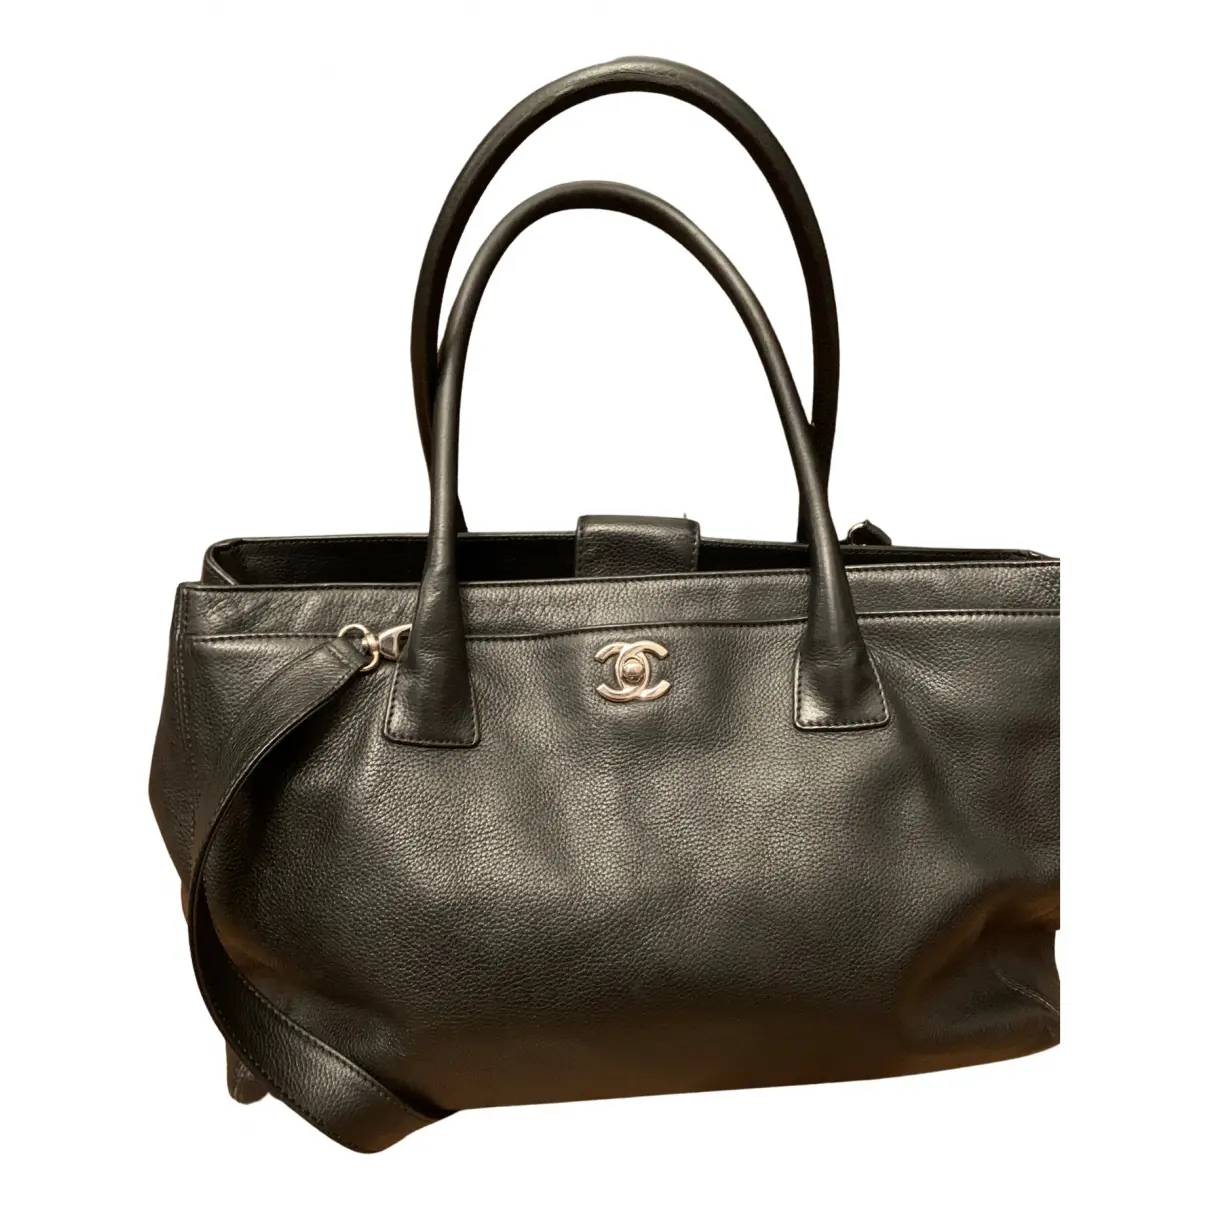 Executive pony-style calfskin tote Chanel - Vintage